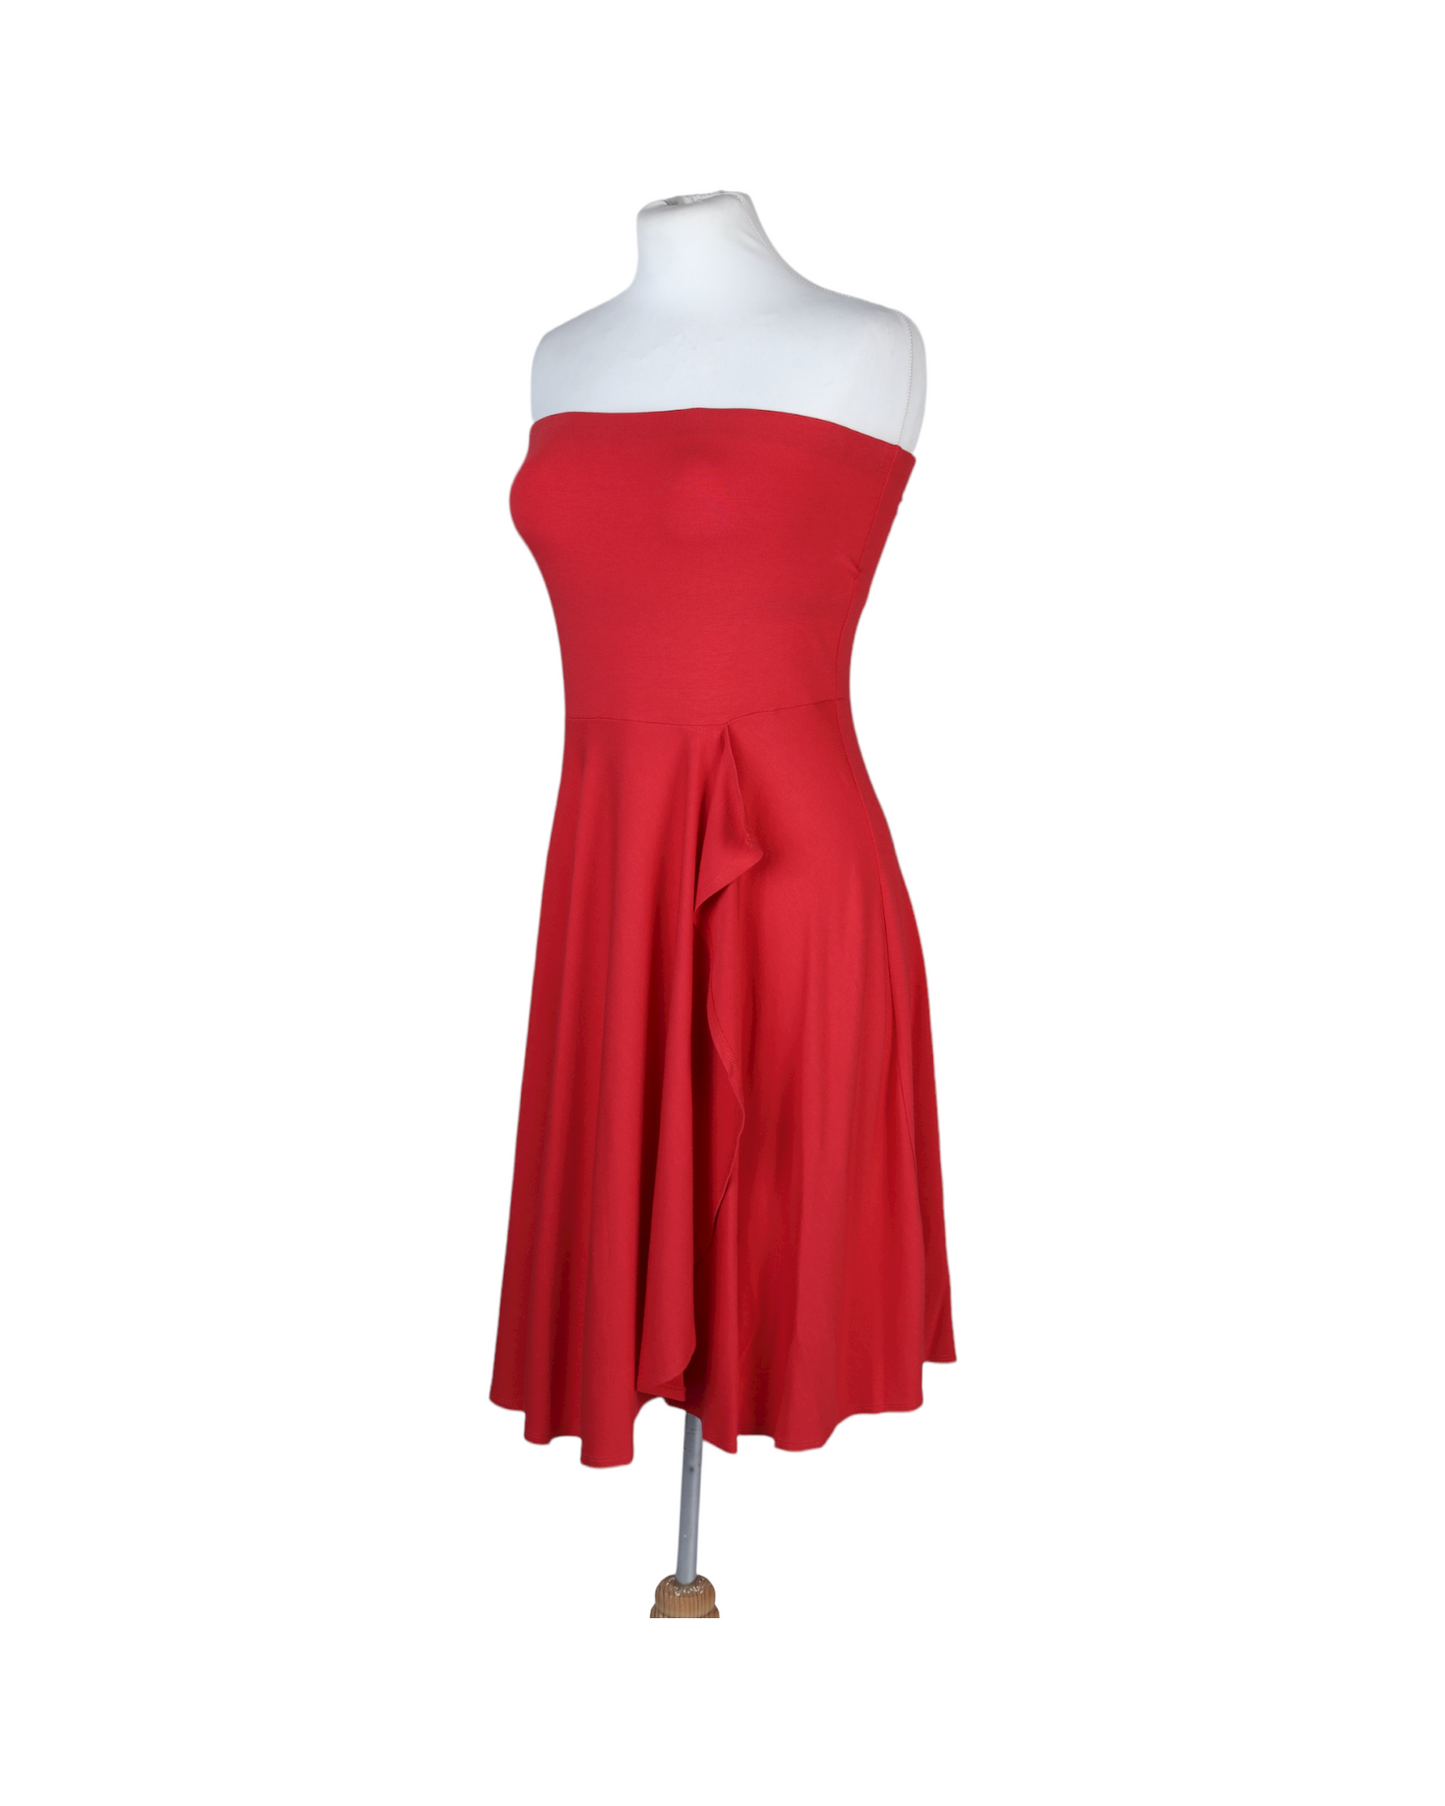 Ann Taylor Red Strapless Cocktail Dress